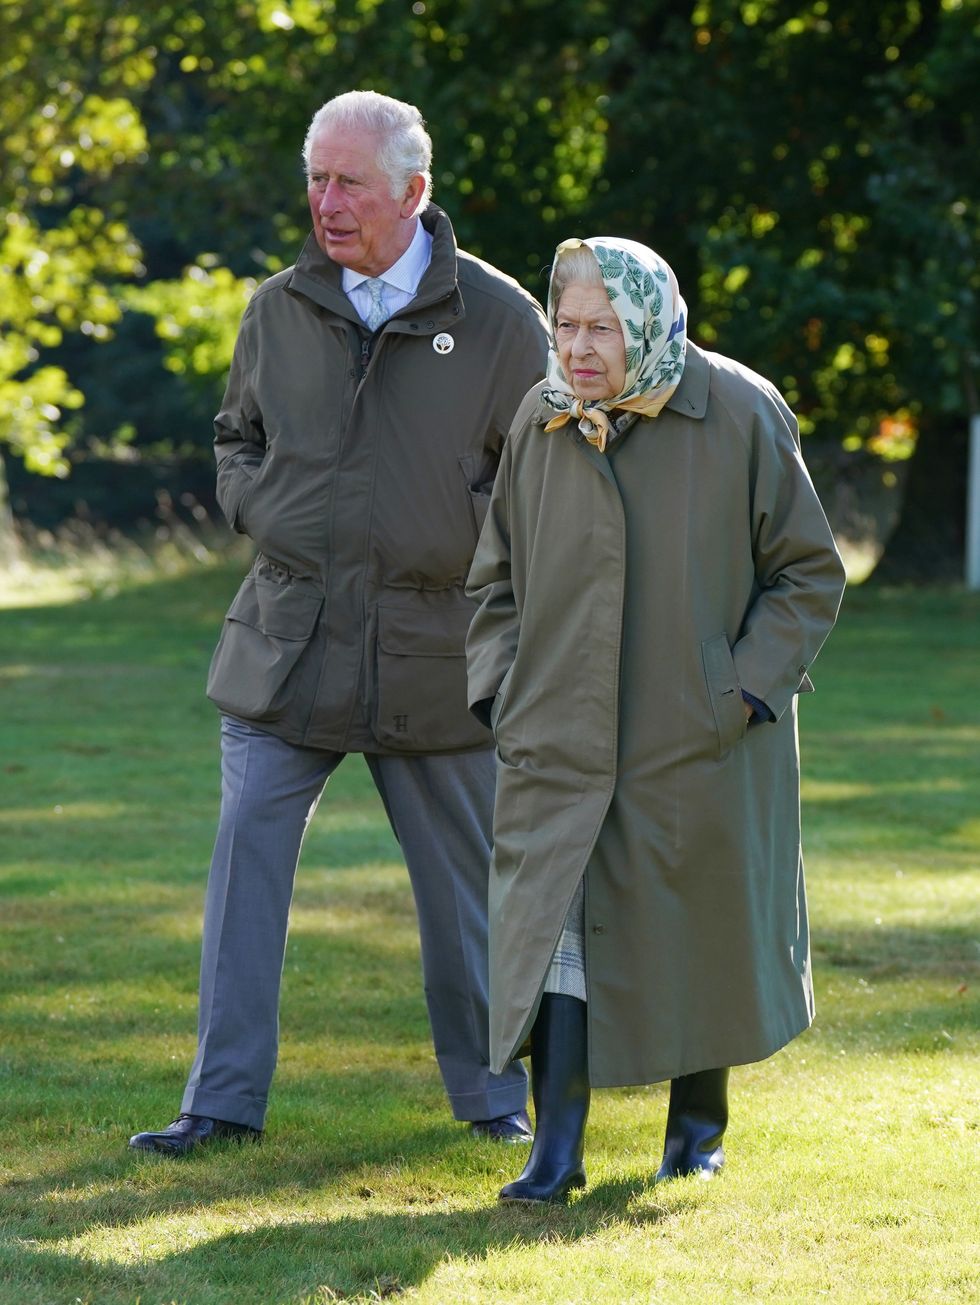 The Queen was joined by the Prince of Wales at Balmoral to plant the tree (Andrew Milligan/PA)